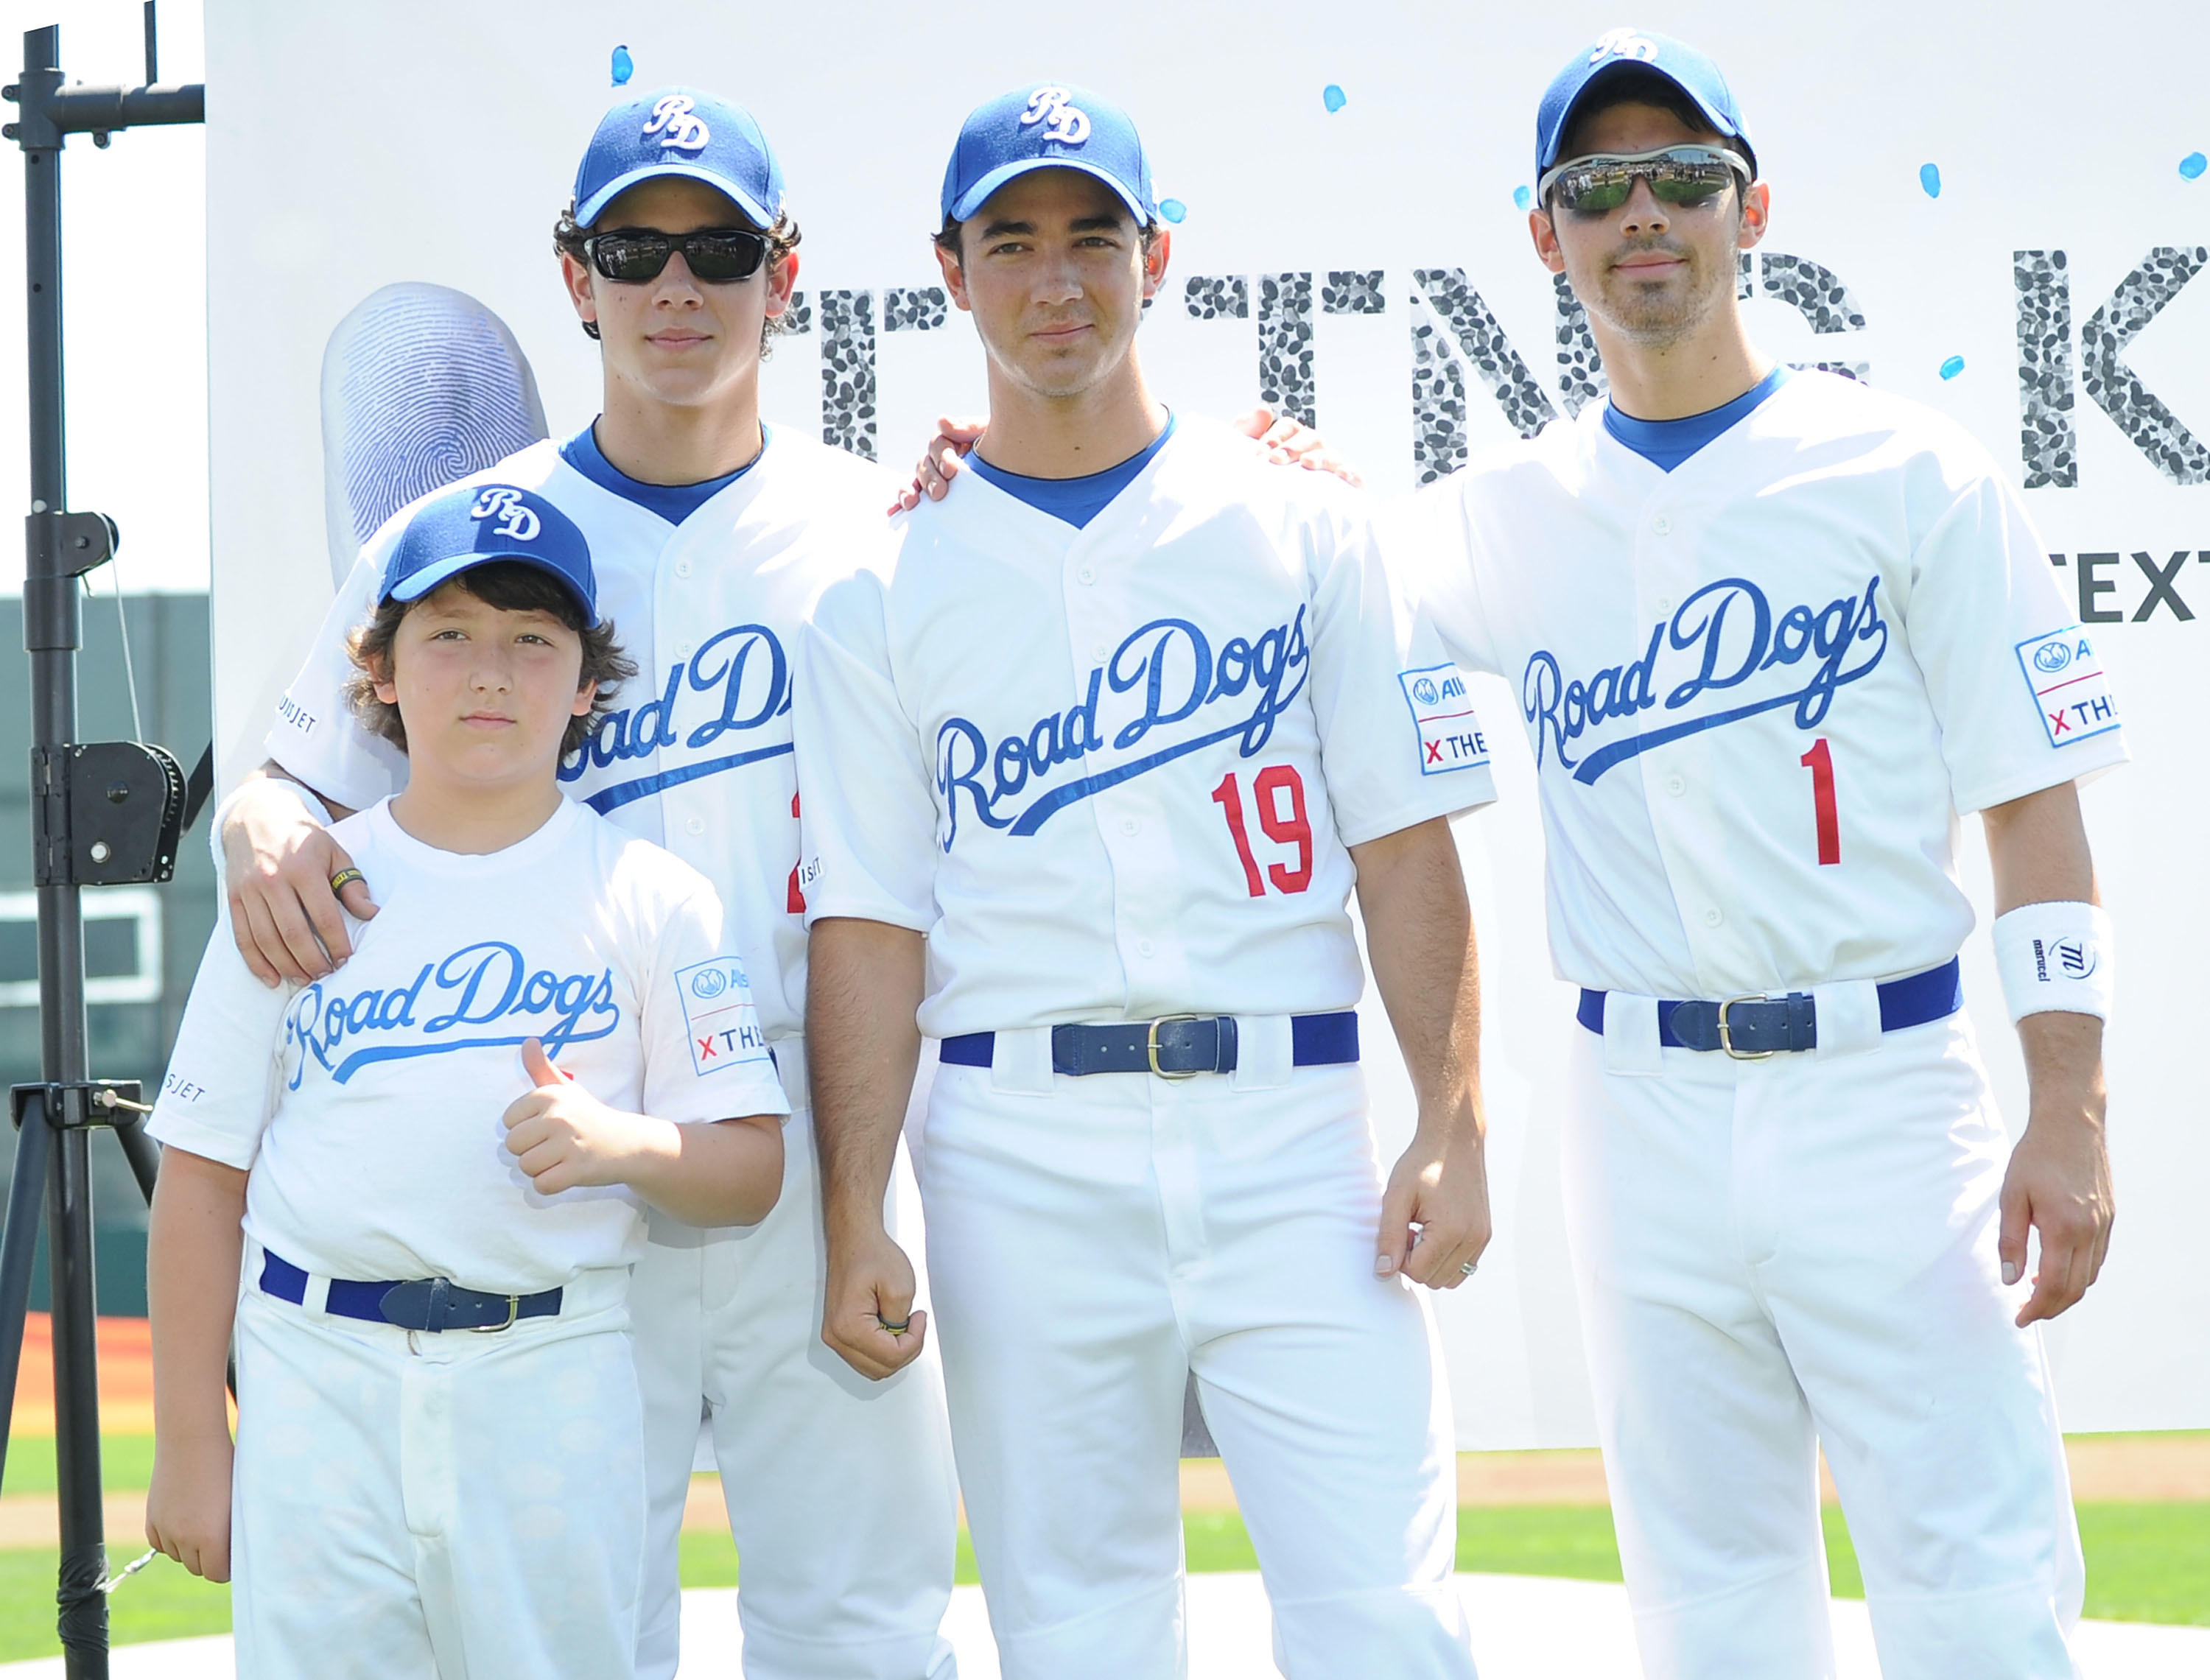 the brothers in baseball uniforms